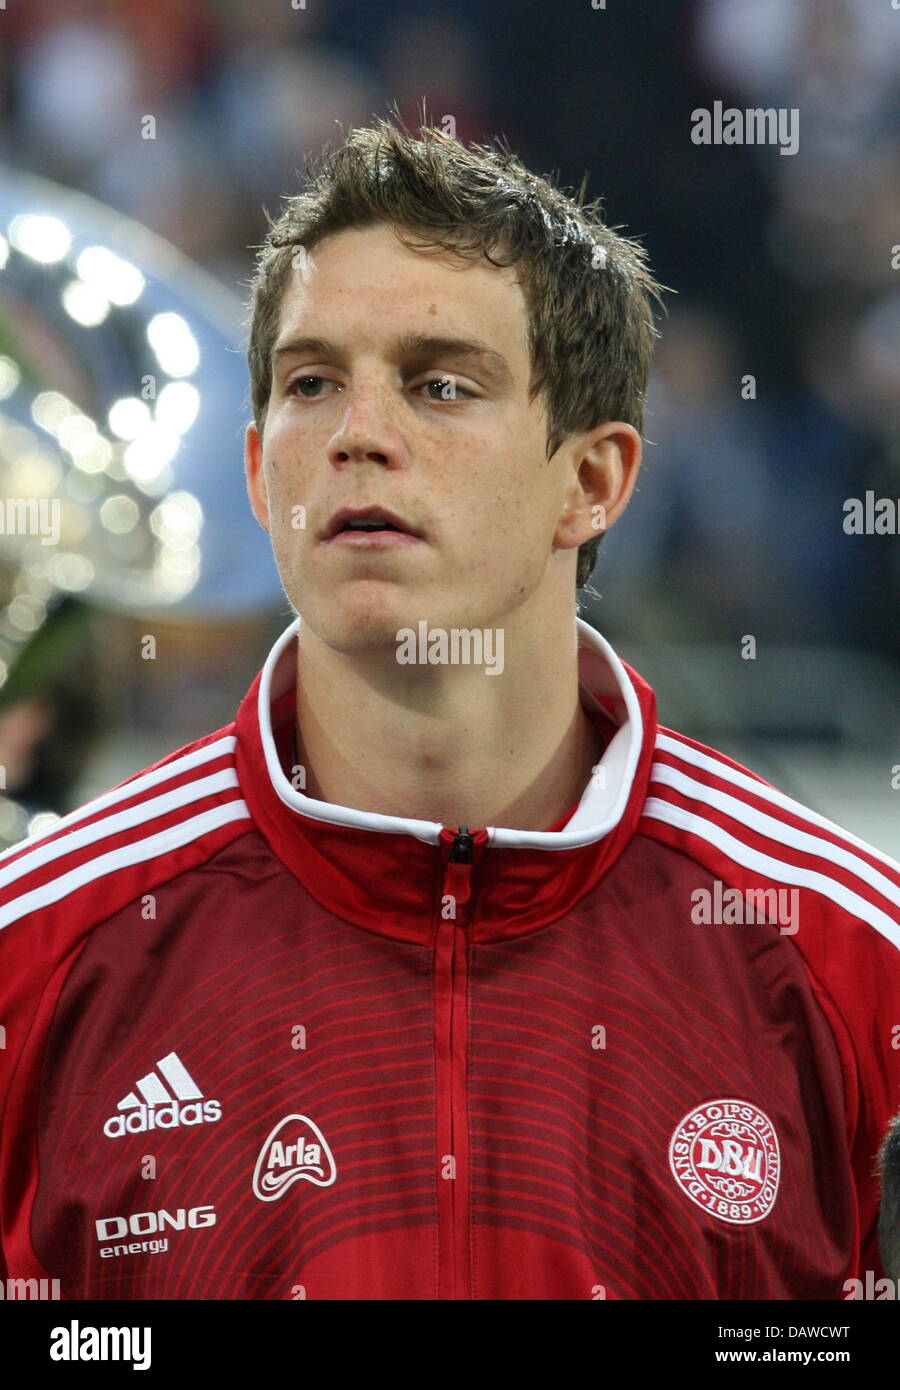 Danish international Daniel Agger pictured before the test cap Germany v Denmark at the MSV Arena stadium of Duisburg, Germany, Wednesday, 28 March 2007. Denmark defeated Germany 0-1. Photo: Franz-Peter Tschauner Stock Photo